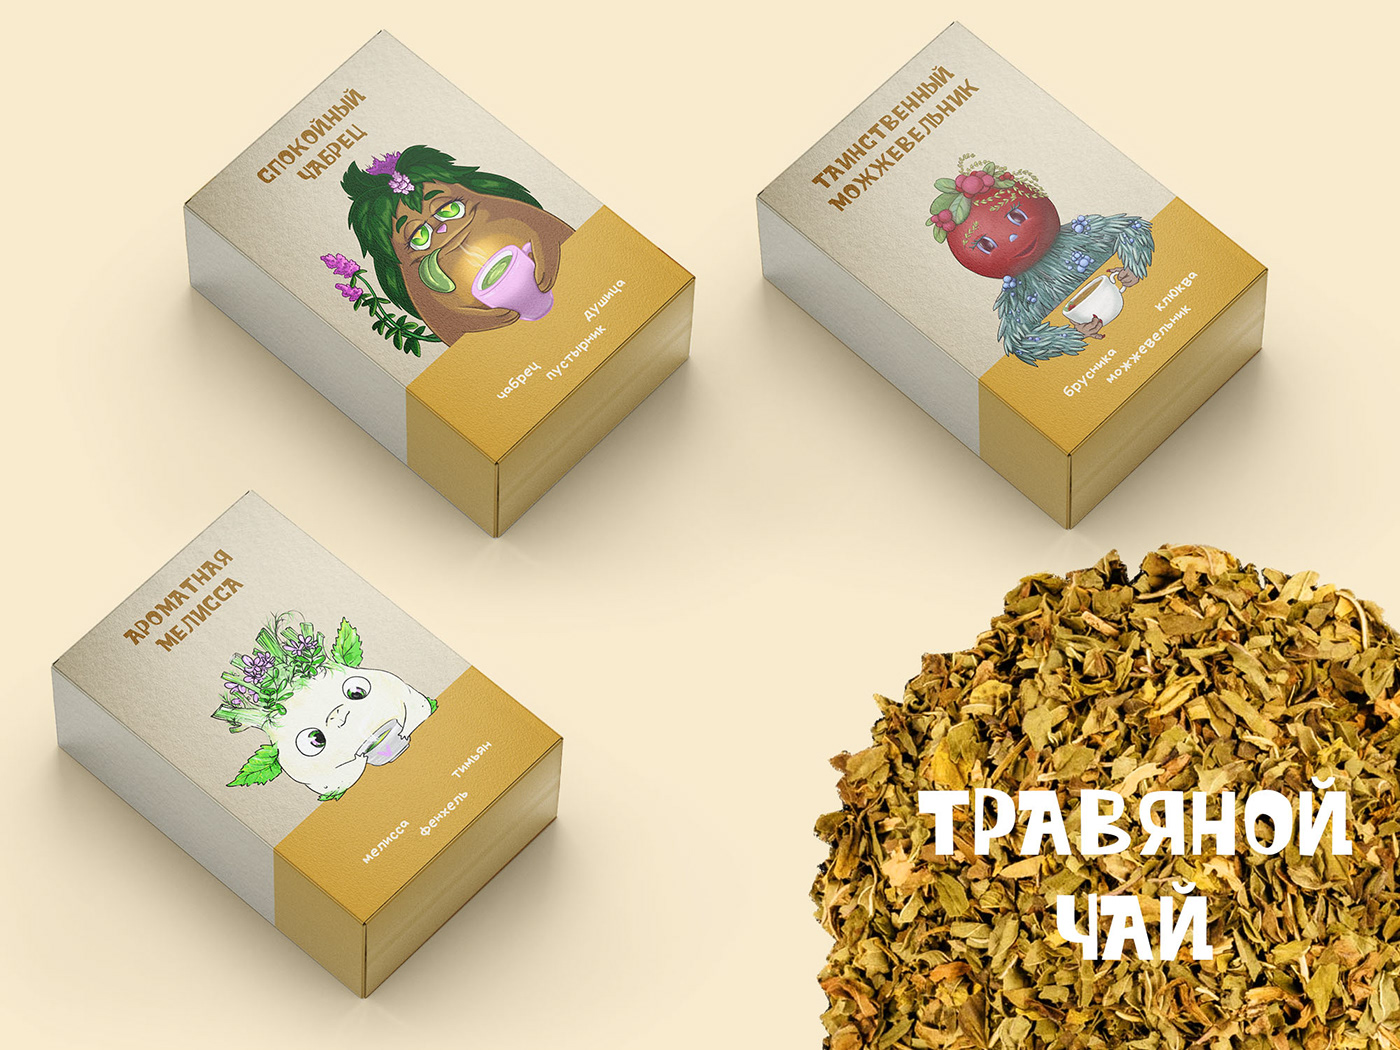 Three teaboxes of great herbal tea with unique and funny cartoon mascot monsters set